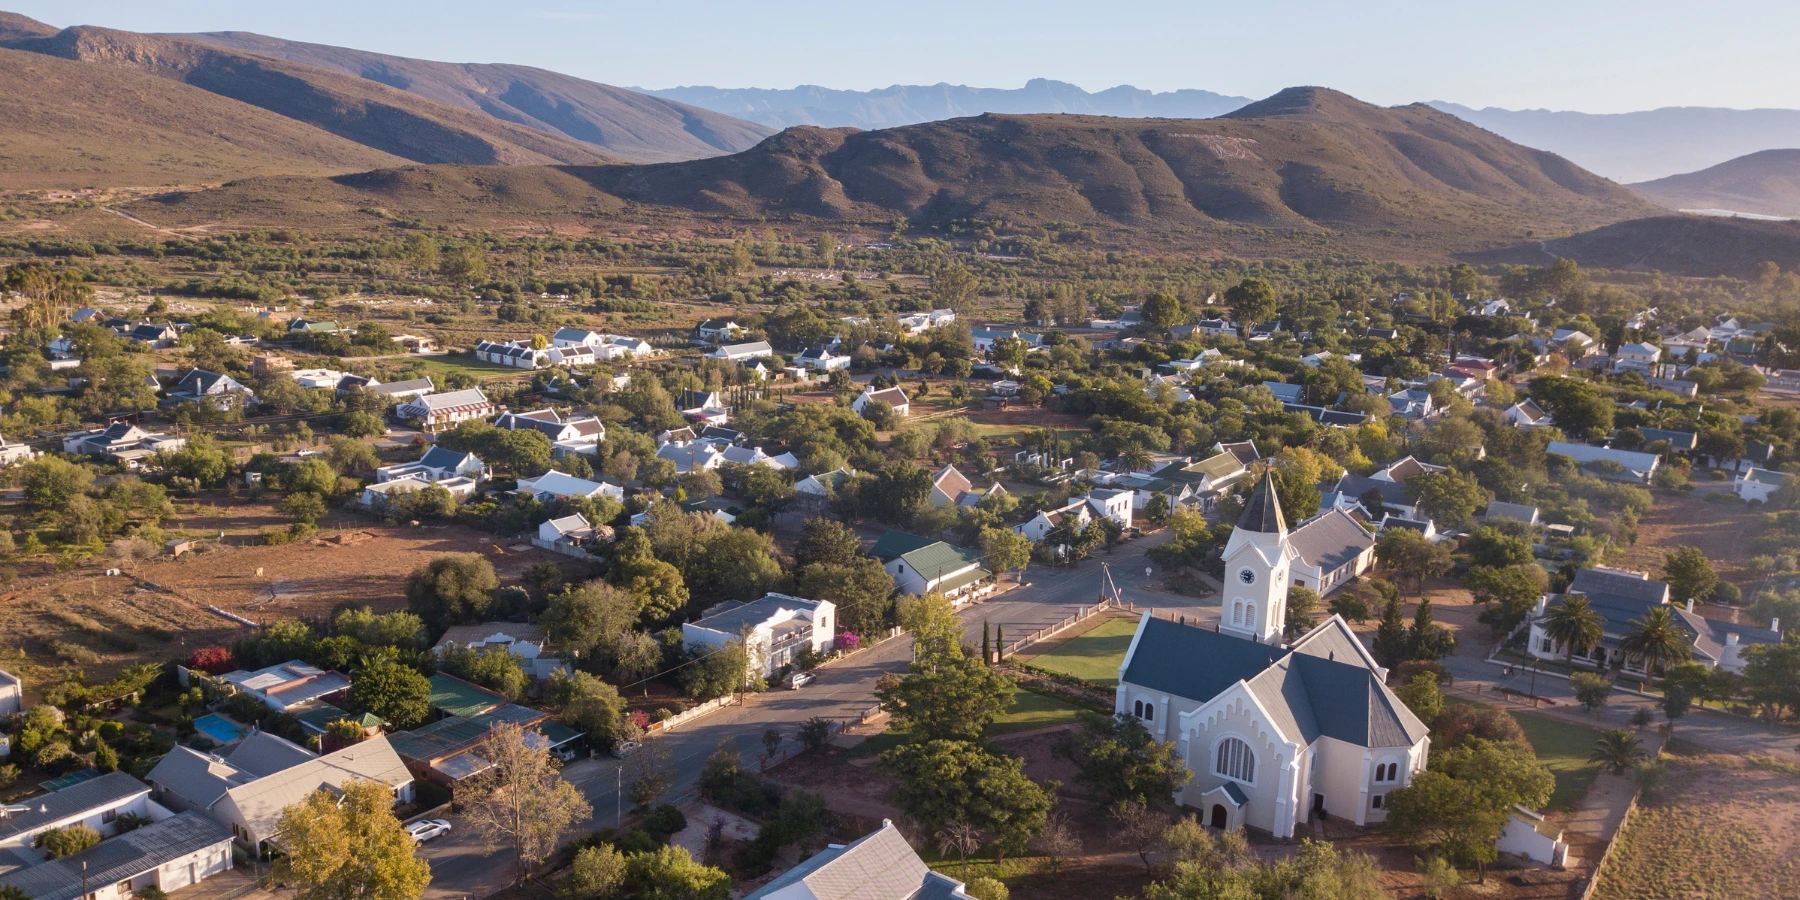 The Pros and Cons of Living in Rural South Africa